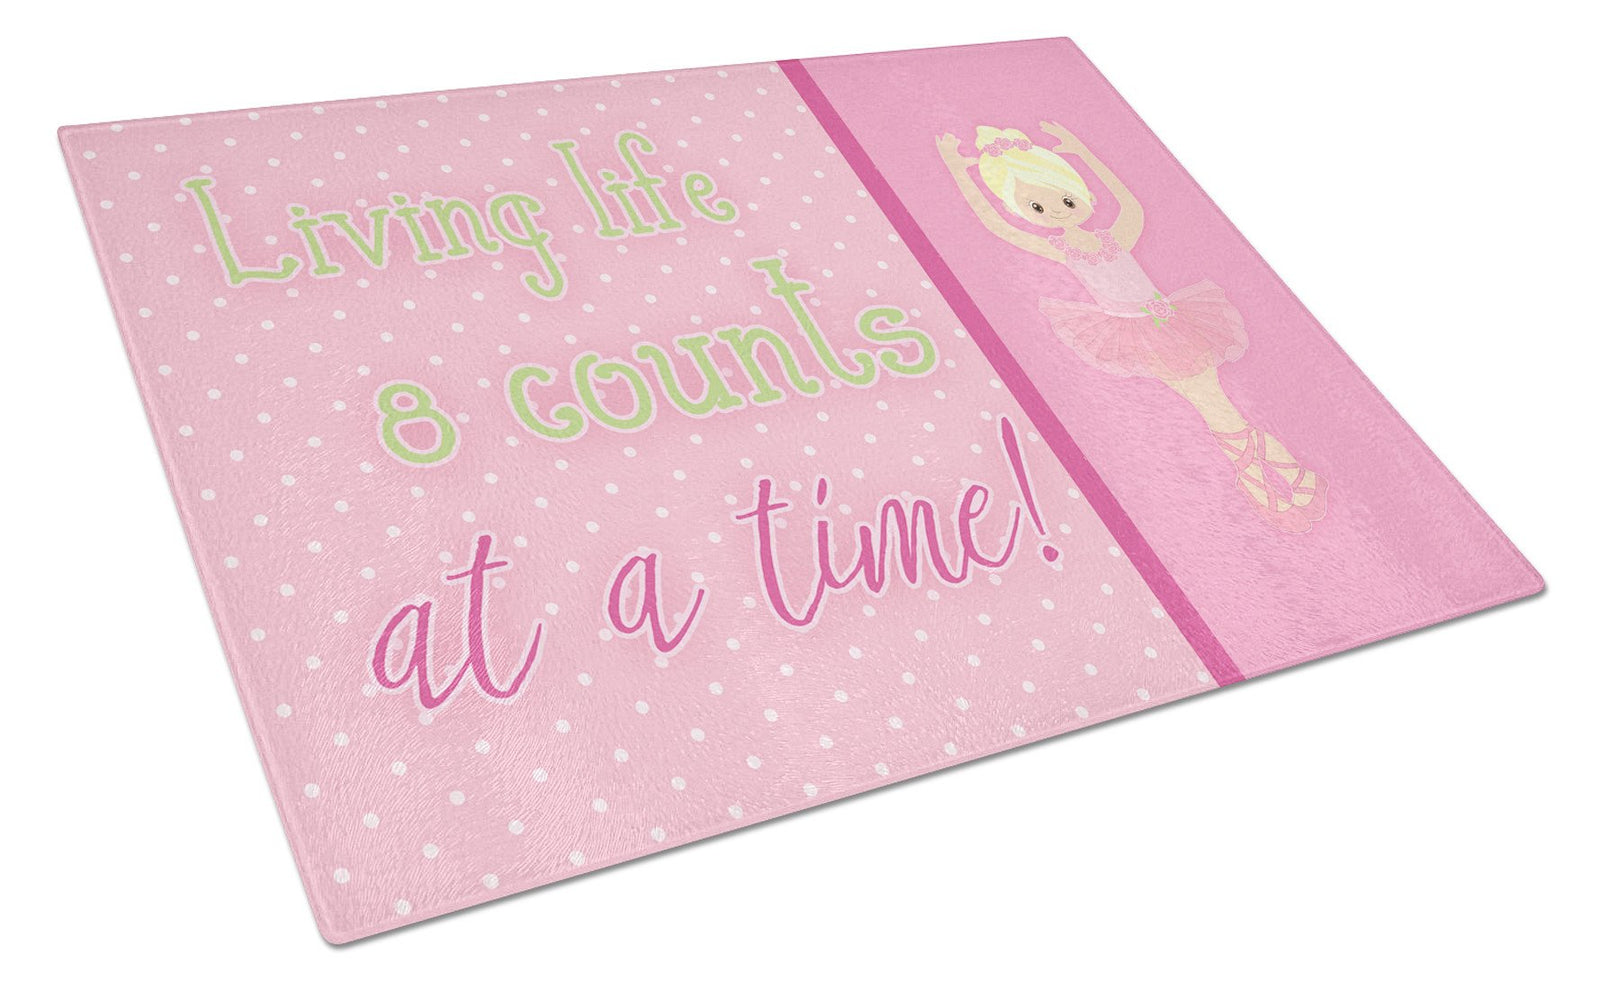 Ballet in 8 Counts Blonde Glass Cutting Board Large BB5397LCB by Caroline's Treasures